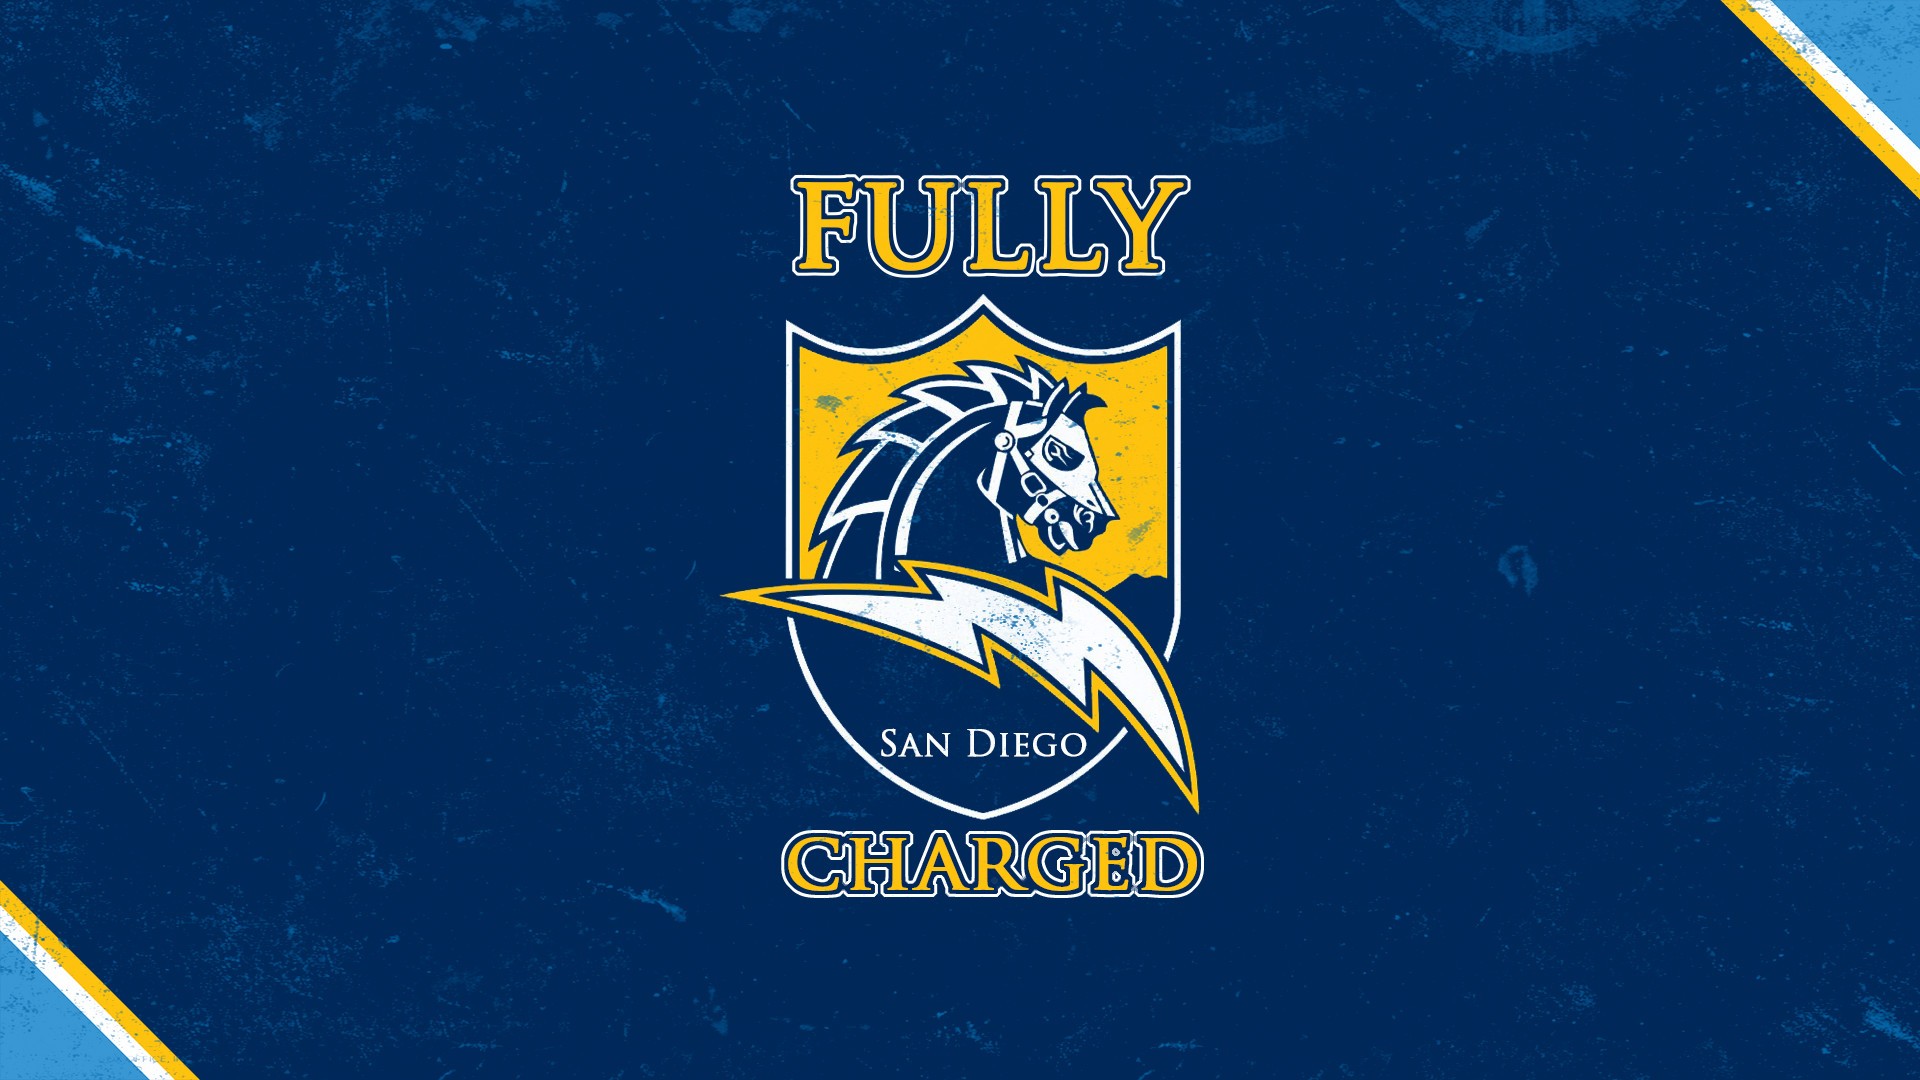 Amazing San Diego Chargers Wallpaper Desktop Image Background